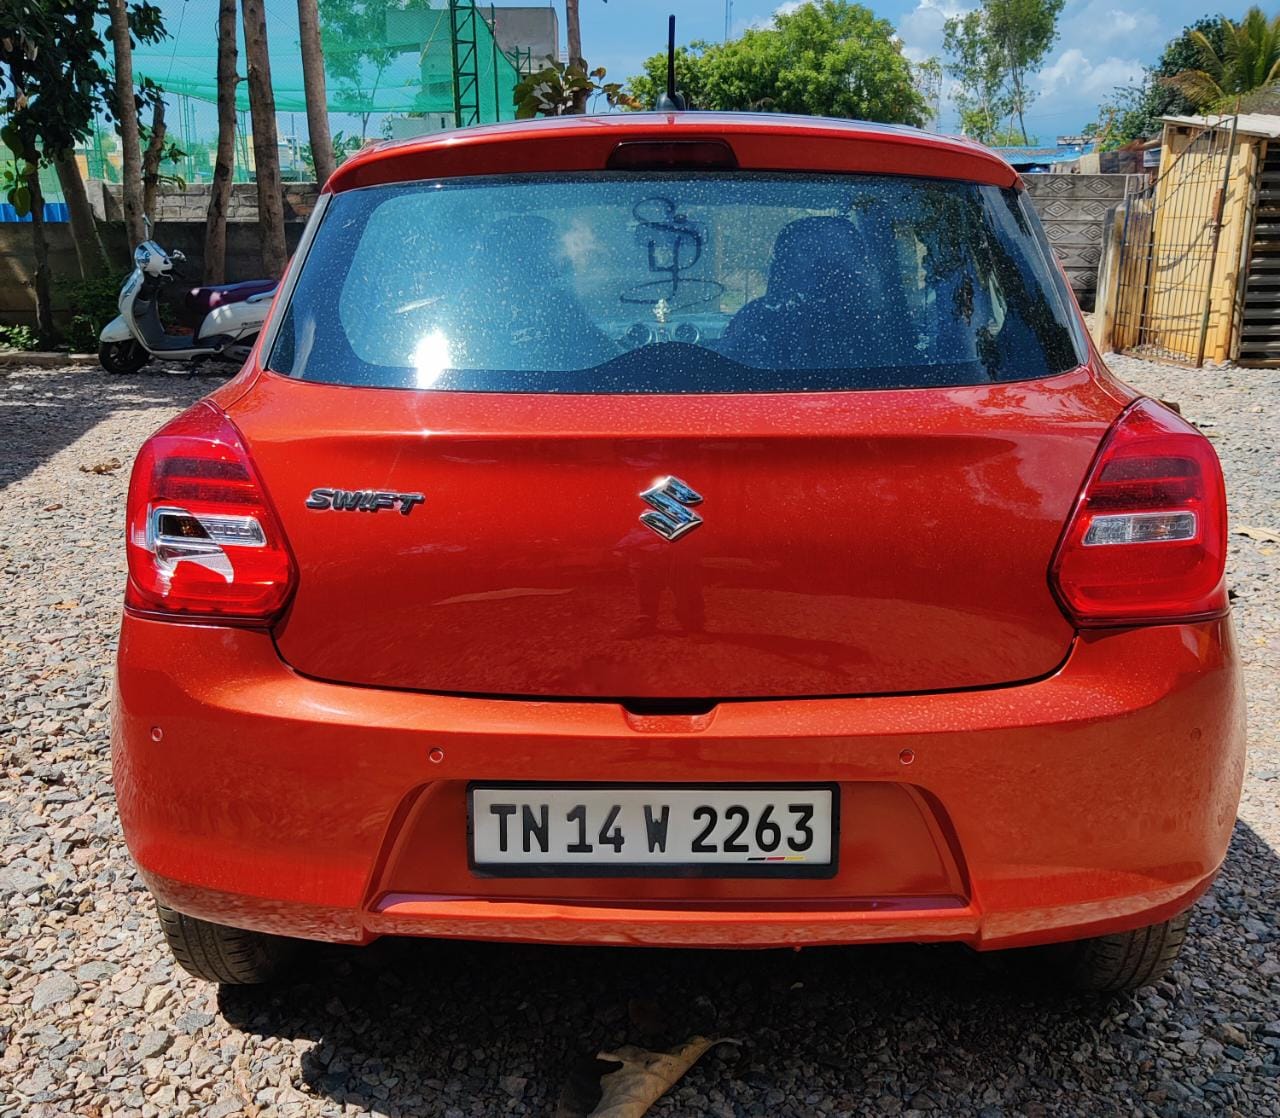 7009-for-sale-Maruthi-Suzuki-Swift-Petrol-First-Owner-2020-TN-registered-rs-569999